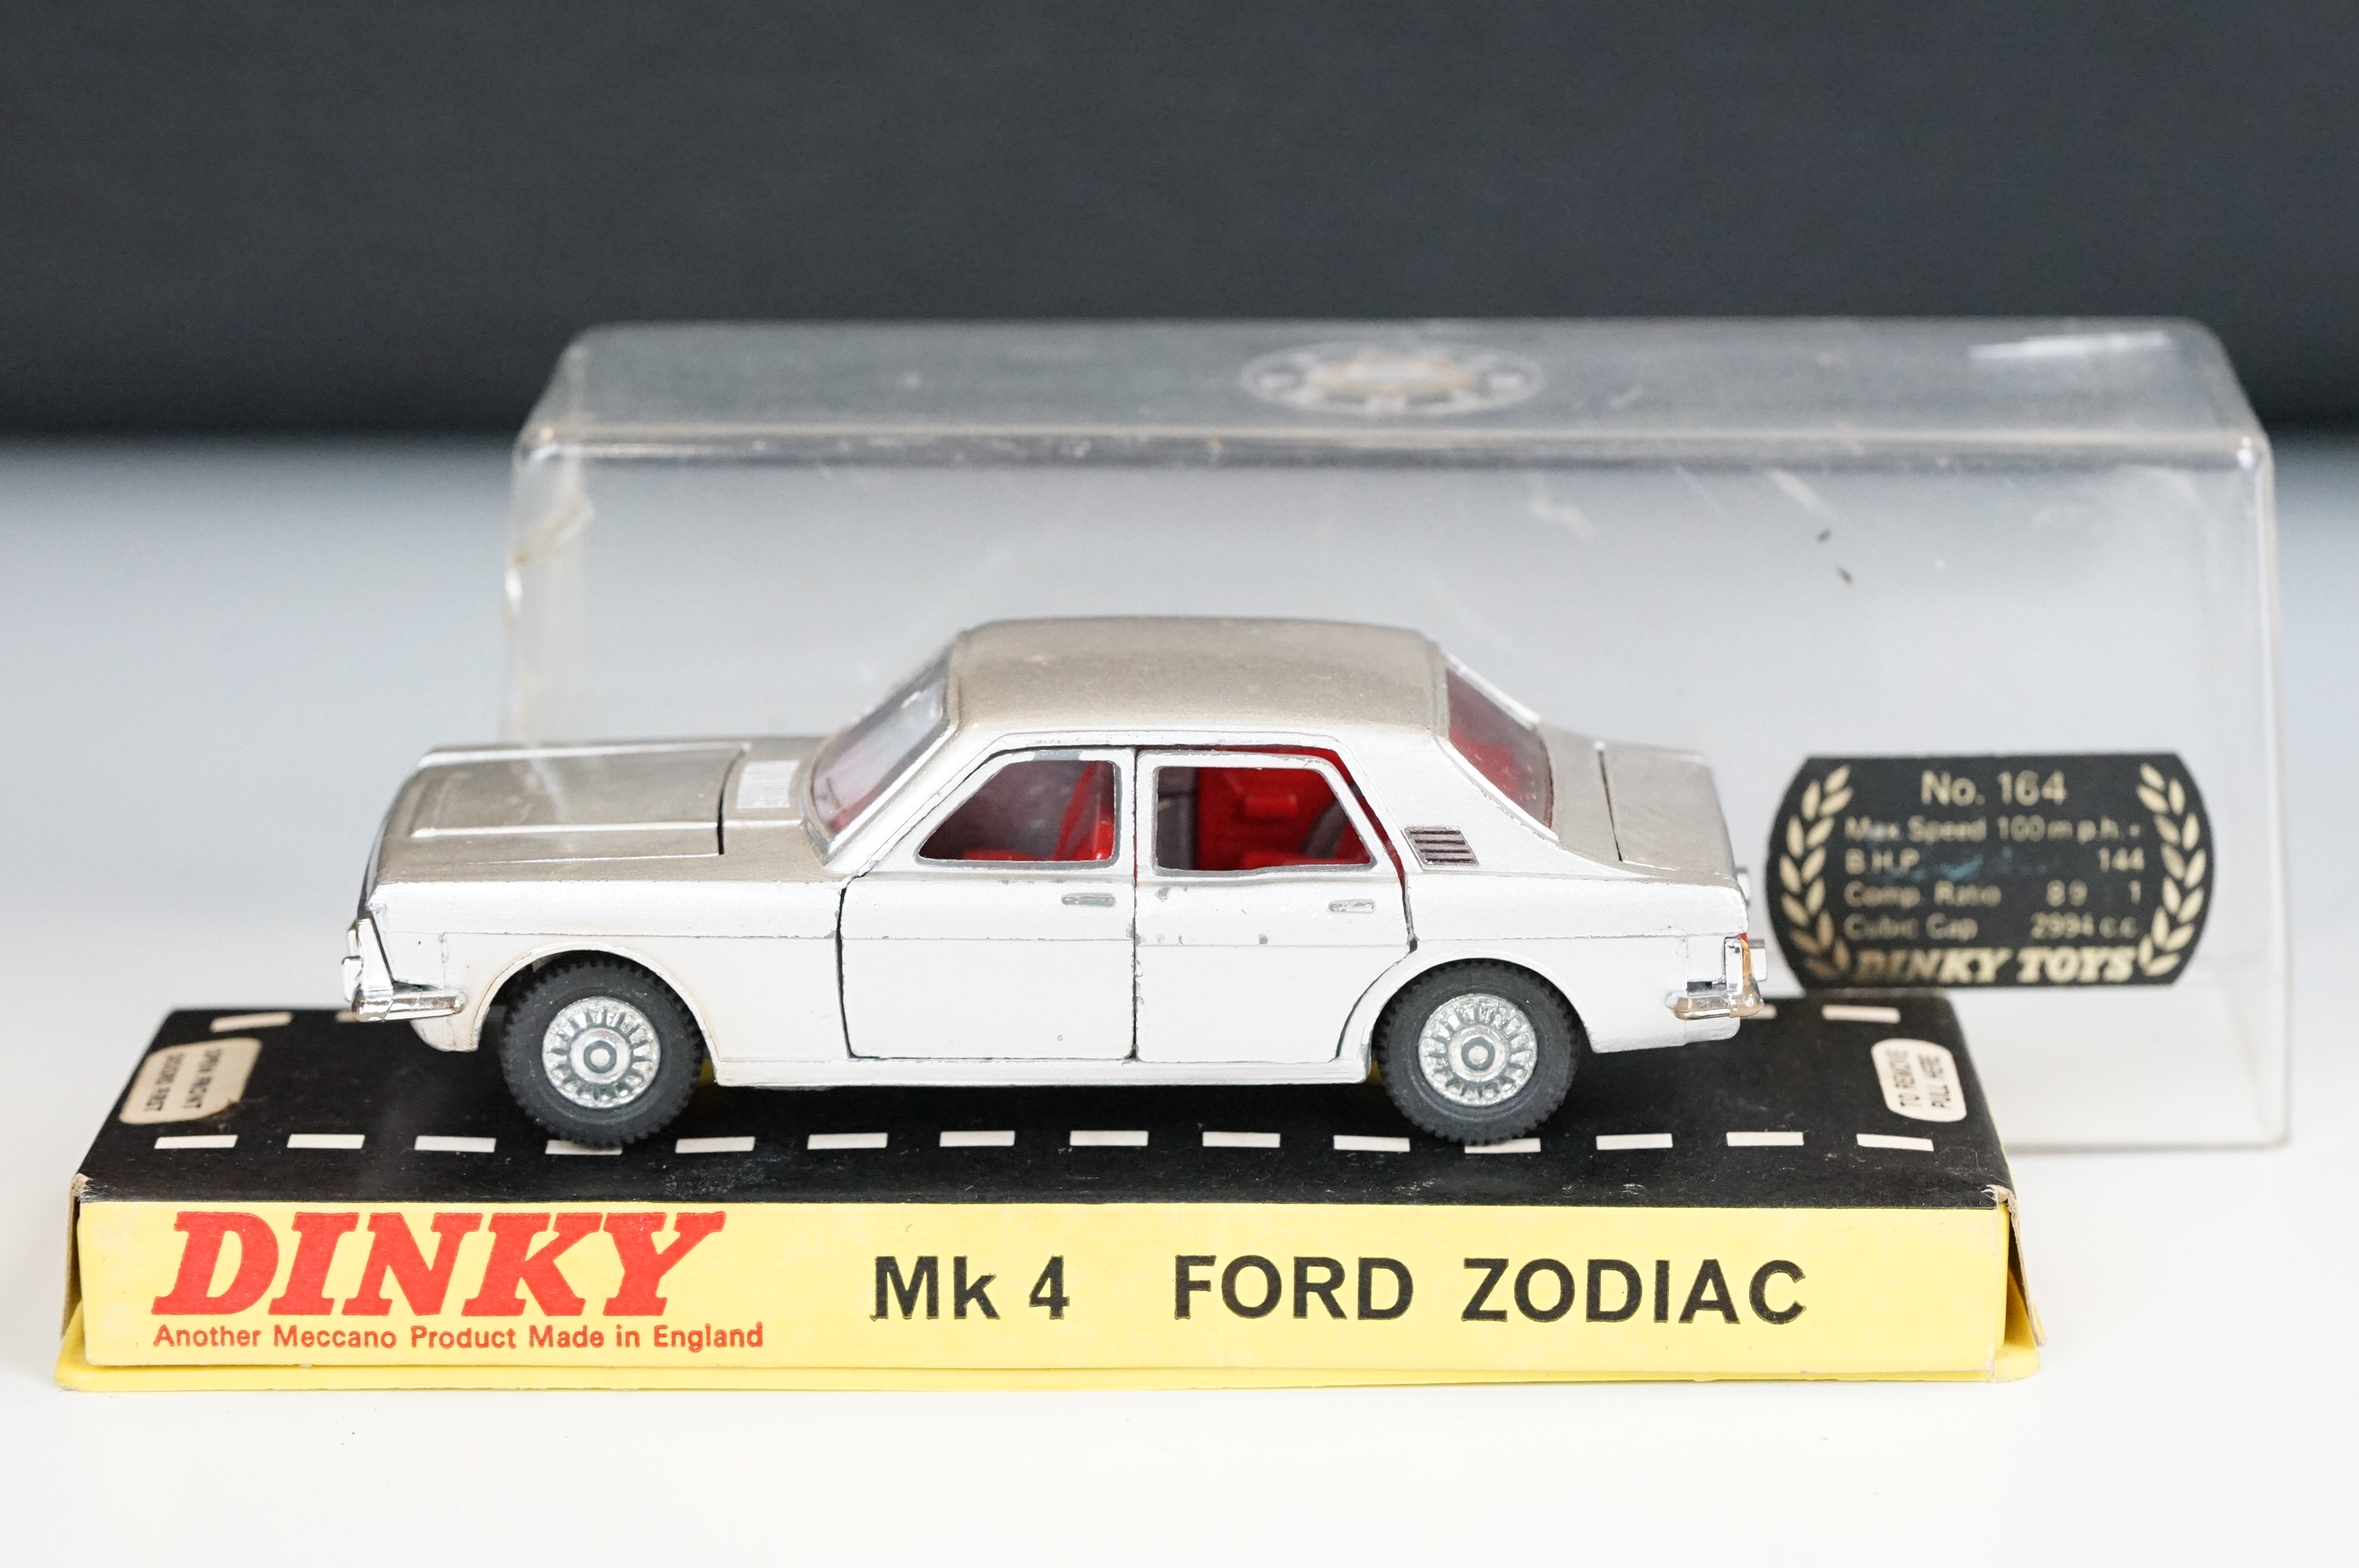 Two cased Dinky diecast models to include 164 Mk 4 Ford Zodiac & 215 Ford G.T. Racing Car (diecast - Image 20 of 23